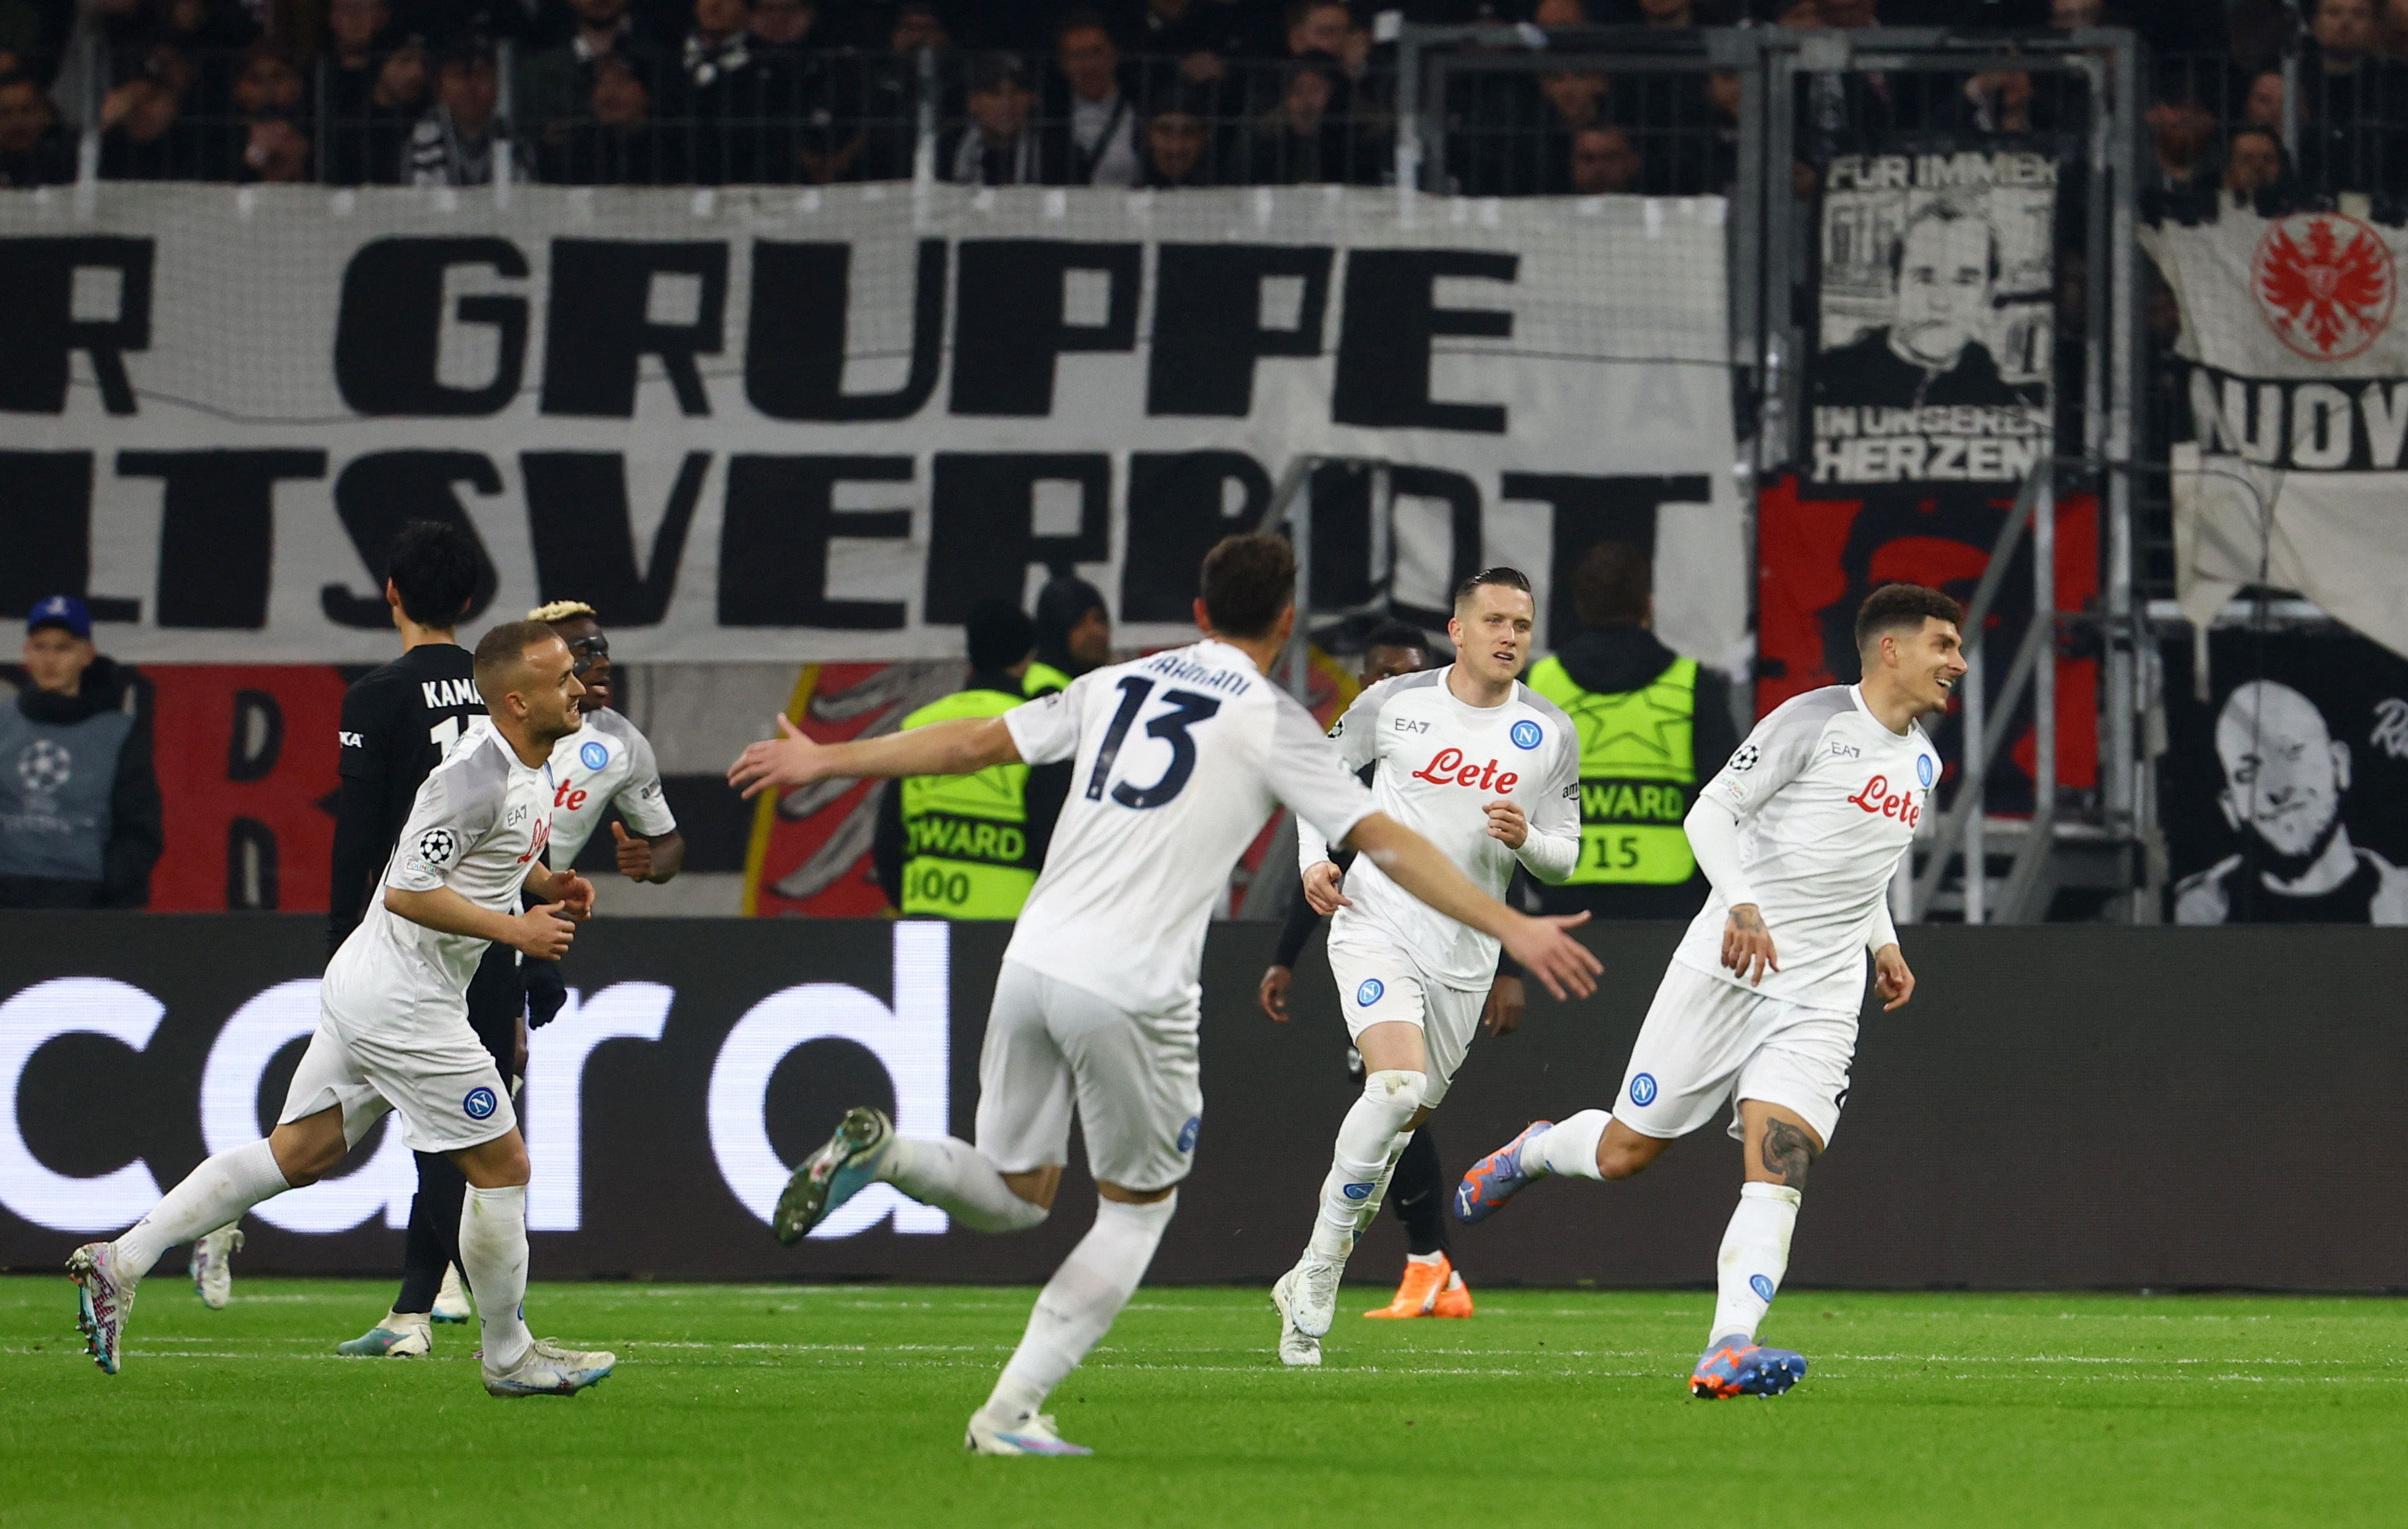 Napoli defeated Eintracht Frankfurt 2-0 in the first leg of the Champions League round of 16 (REUTERS/Kai Pfaffenbach)